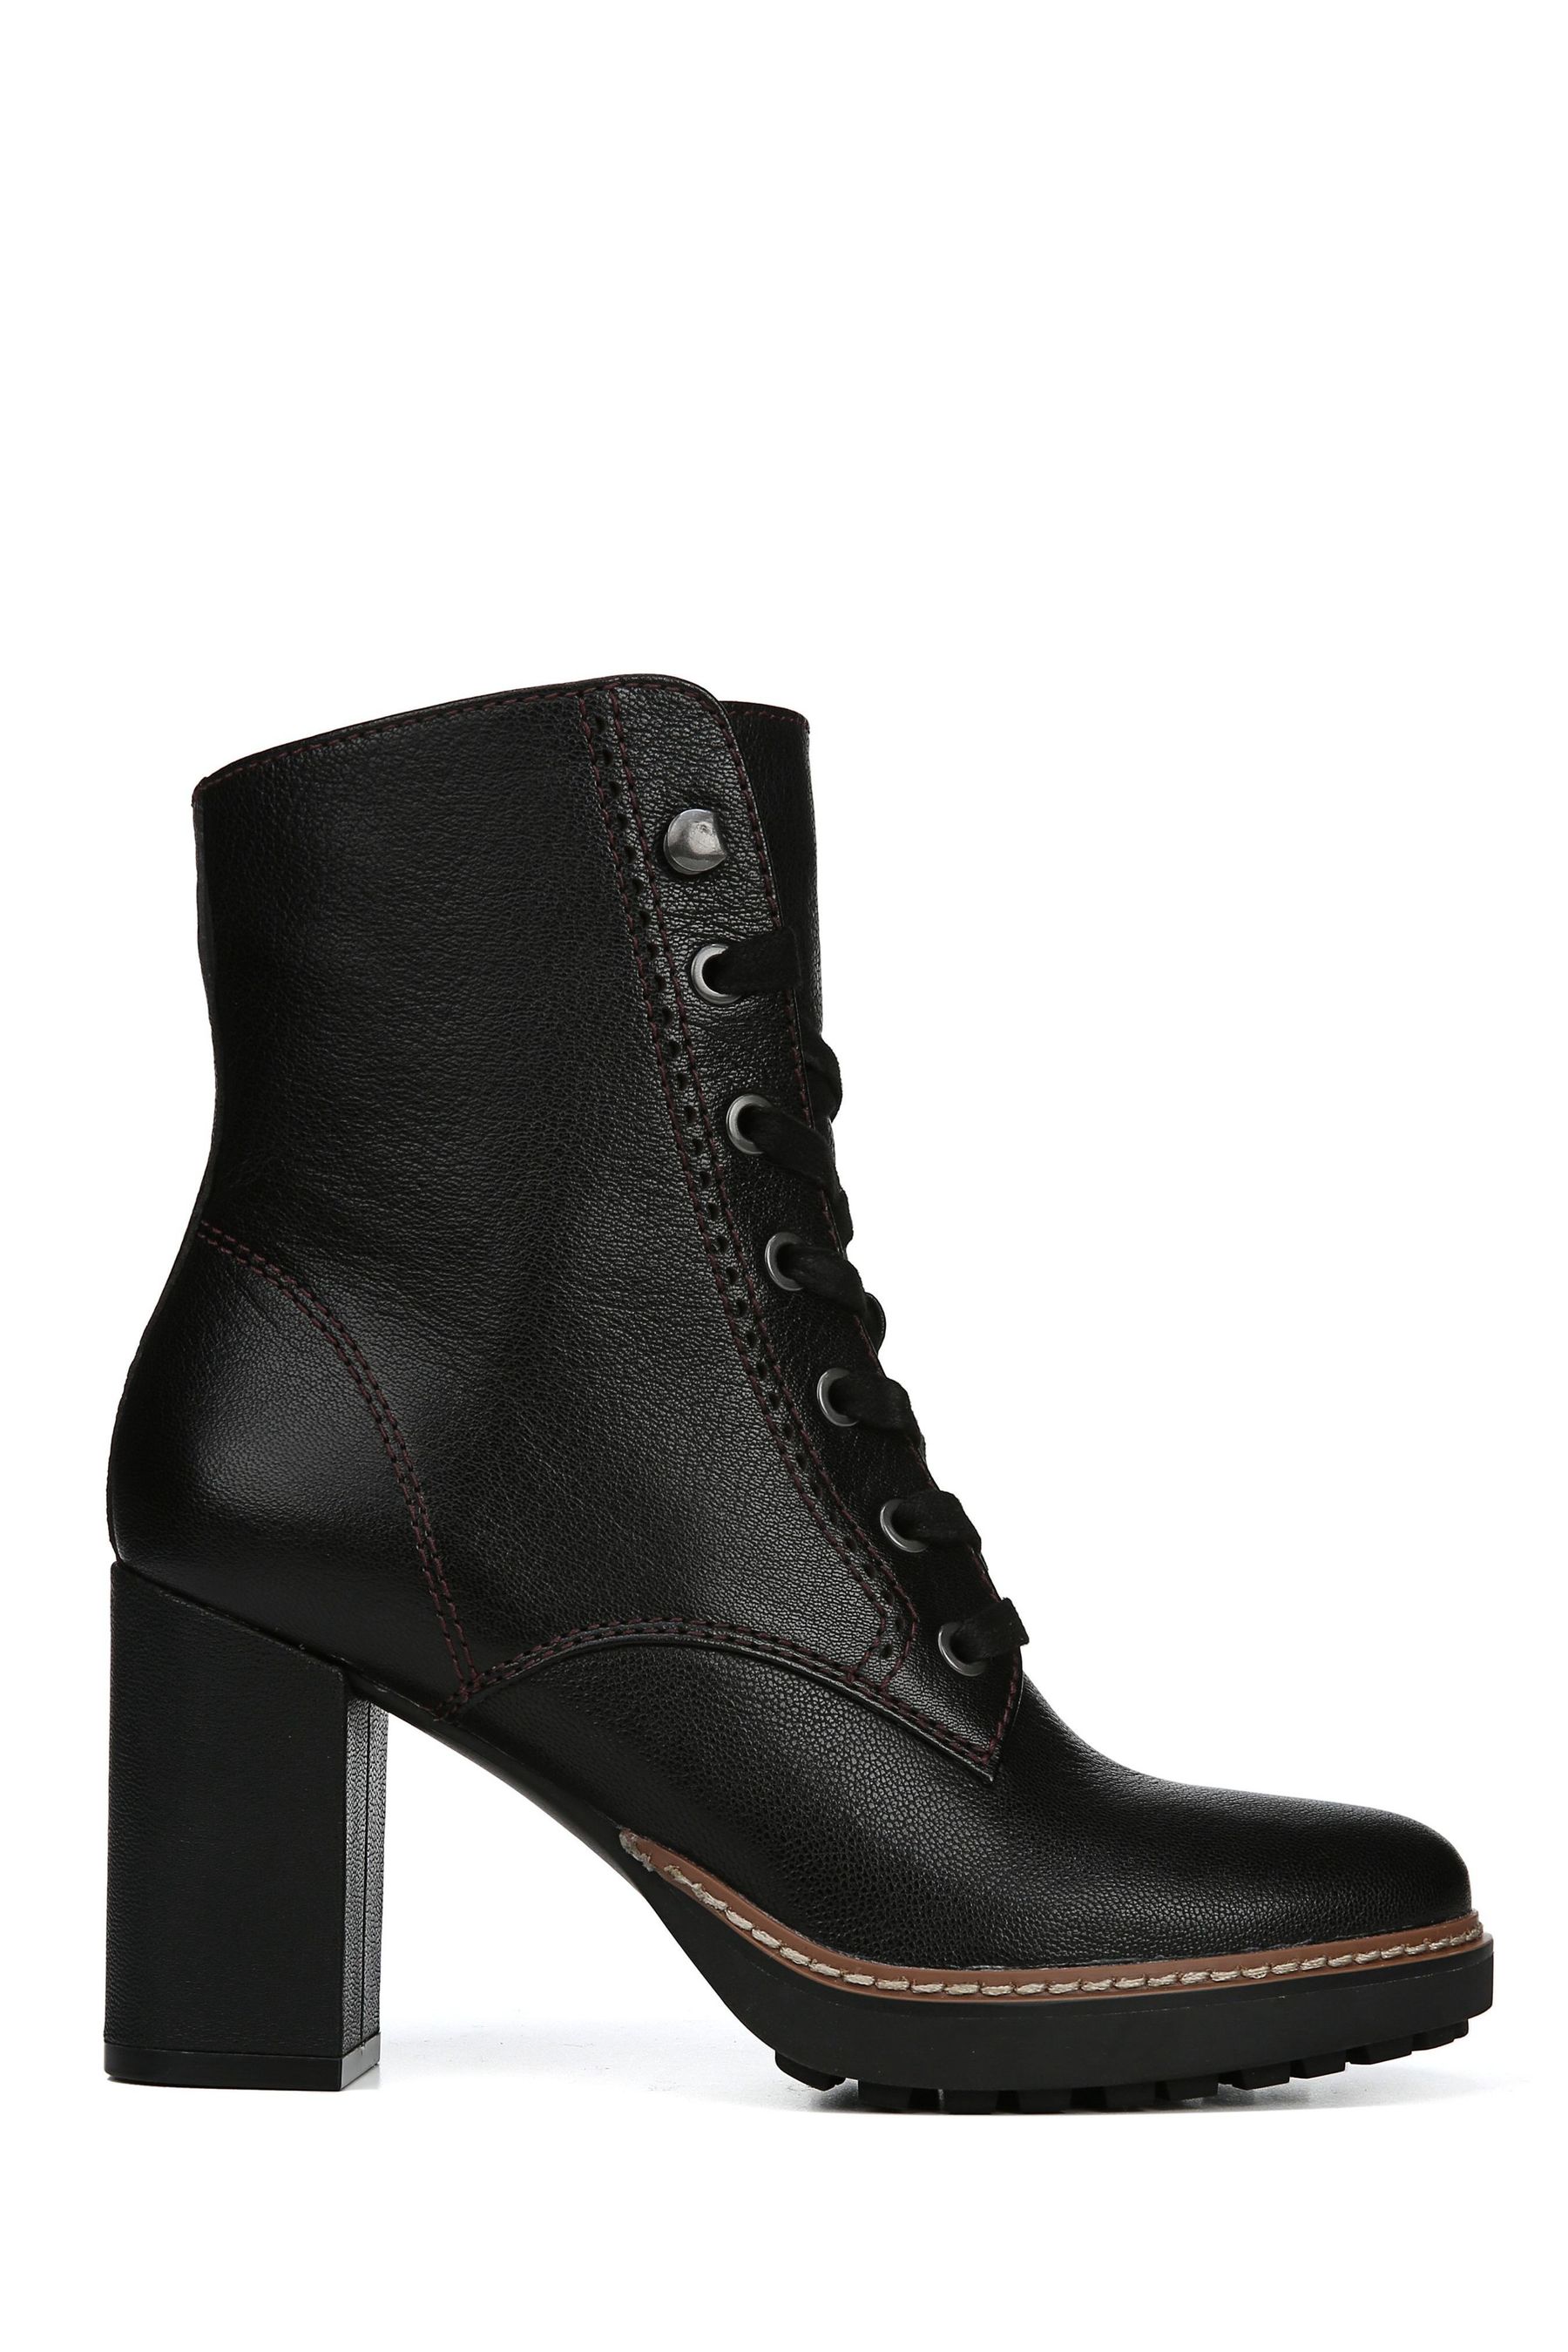 Buy Naturalizer Leather Callie Ankle Black Boots from the Next UK ...